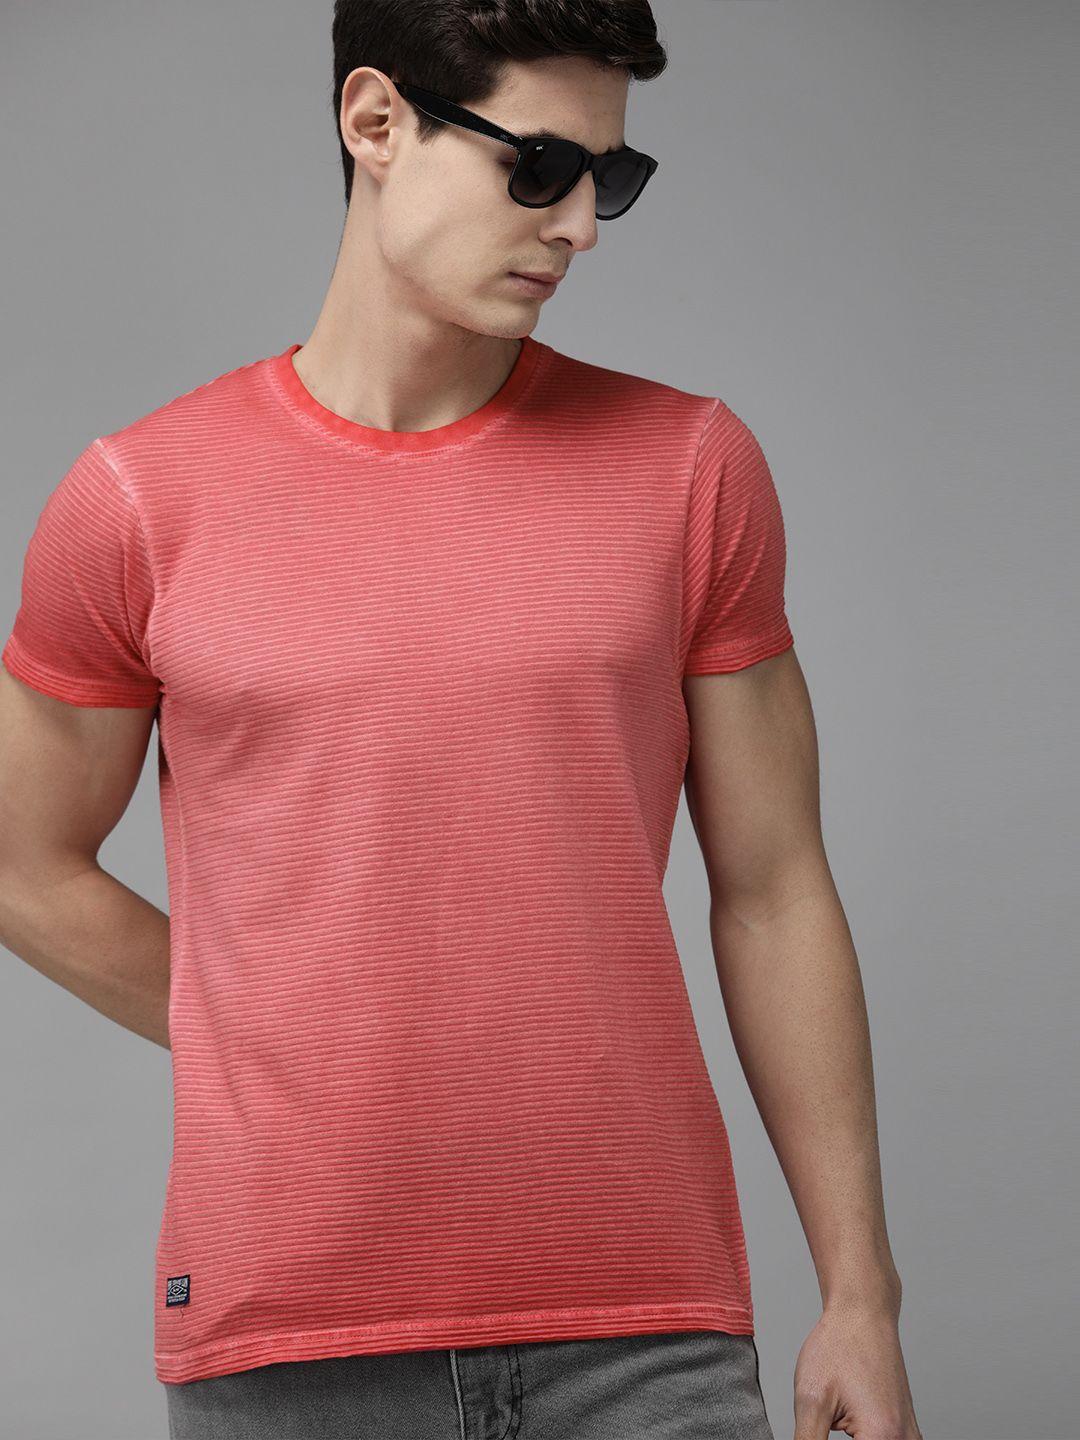 pepe jeans men coral pink self-striped round neck t-shirt